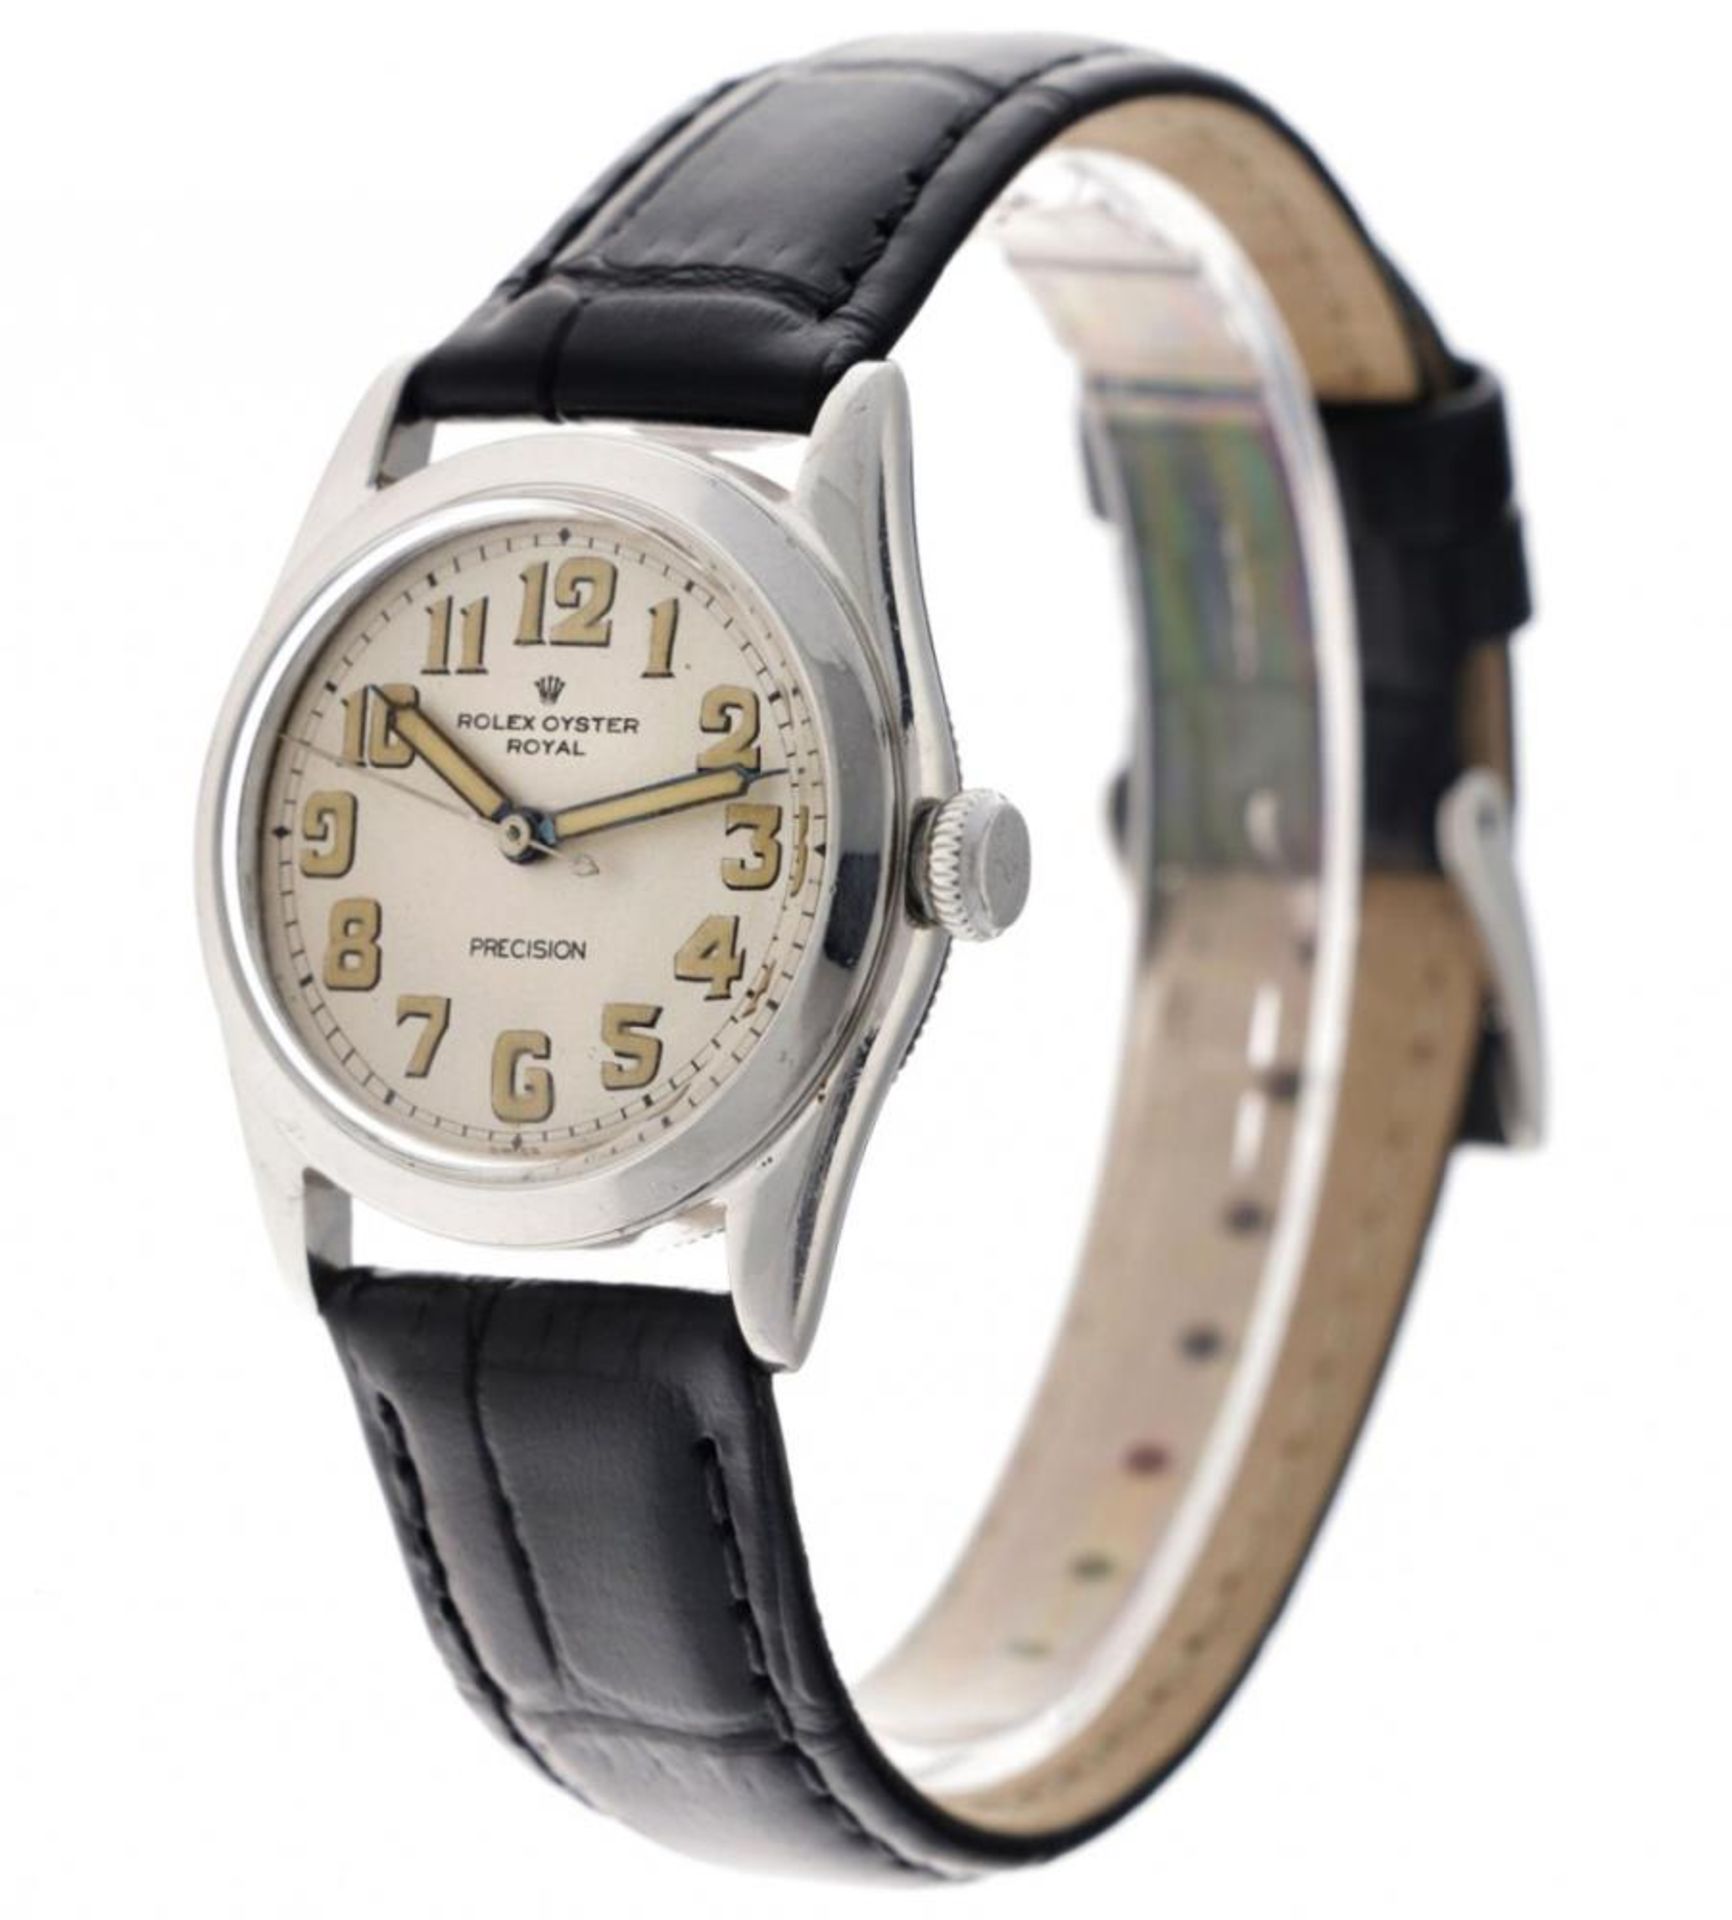 Rolex Oyster Royal 4220 - Men's watch - 1946. - Image 2 of 5